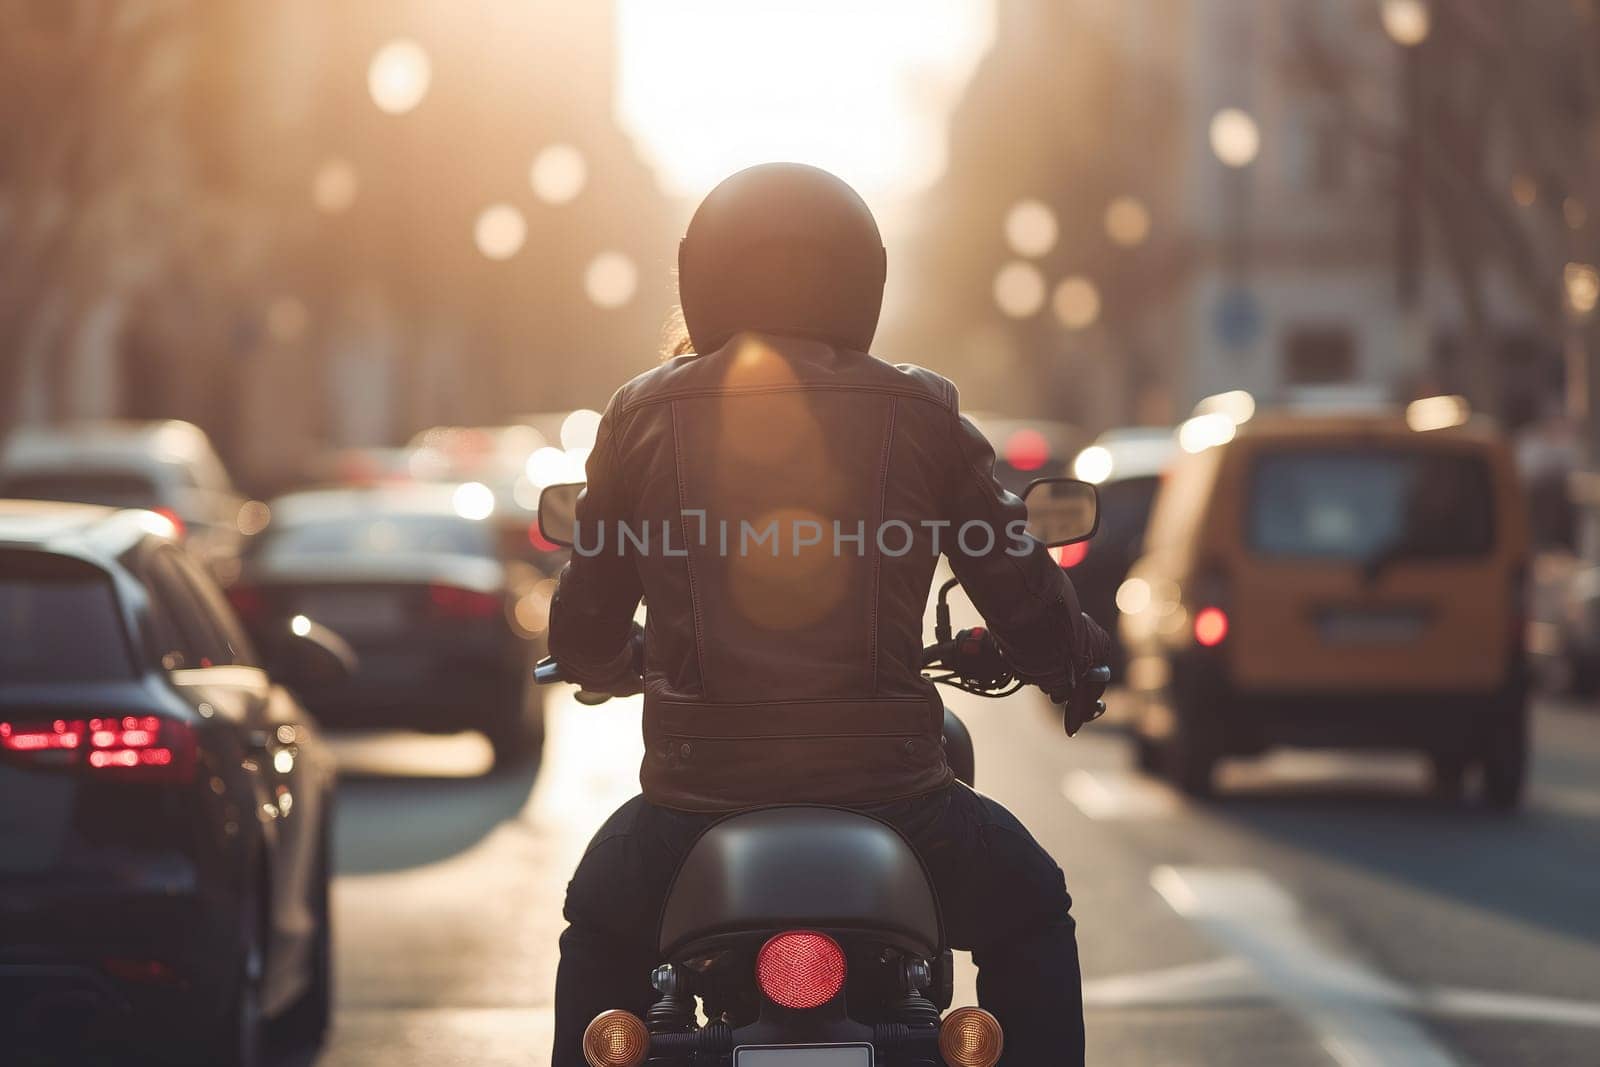 A man rides a motorcycle in city traffic, View from the back, Close-up. Neural network generated image. Not based on any actual scene or pattern.